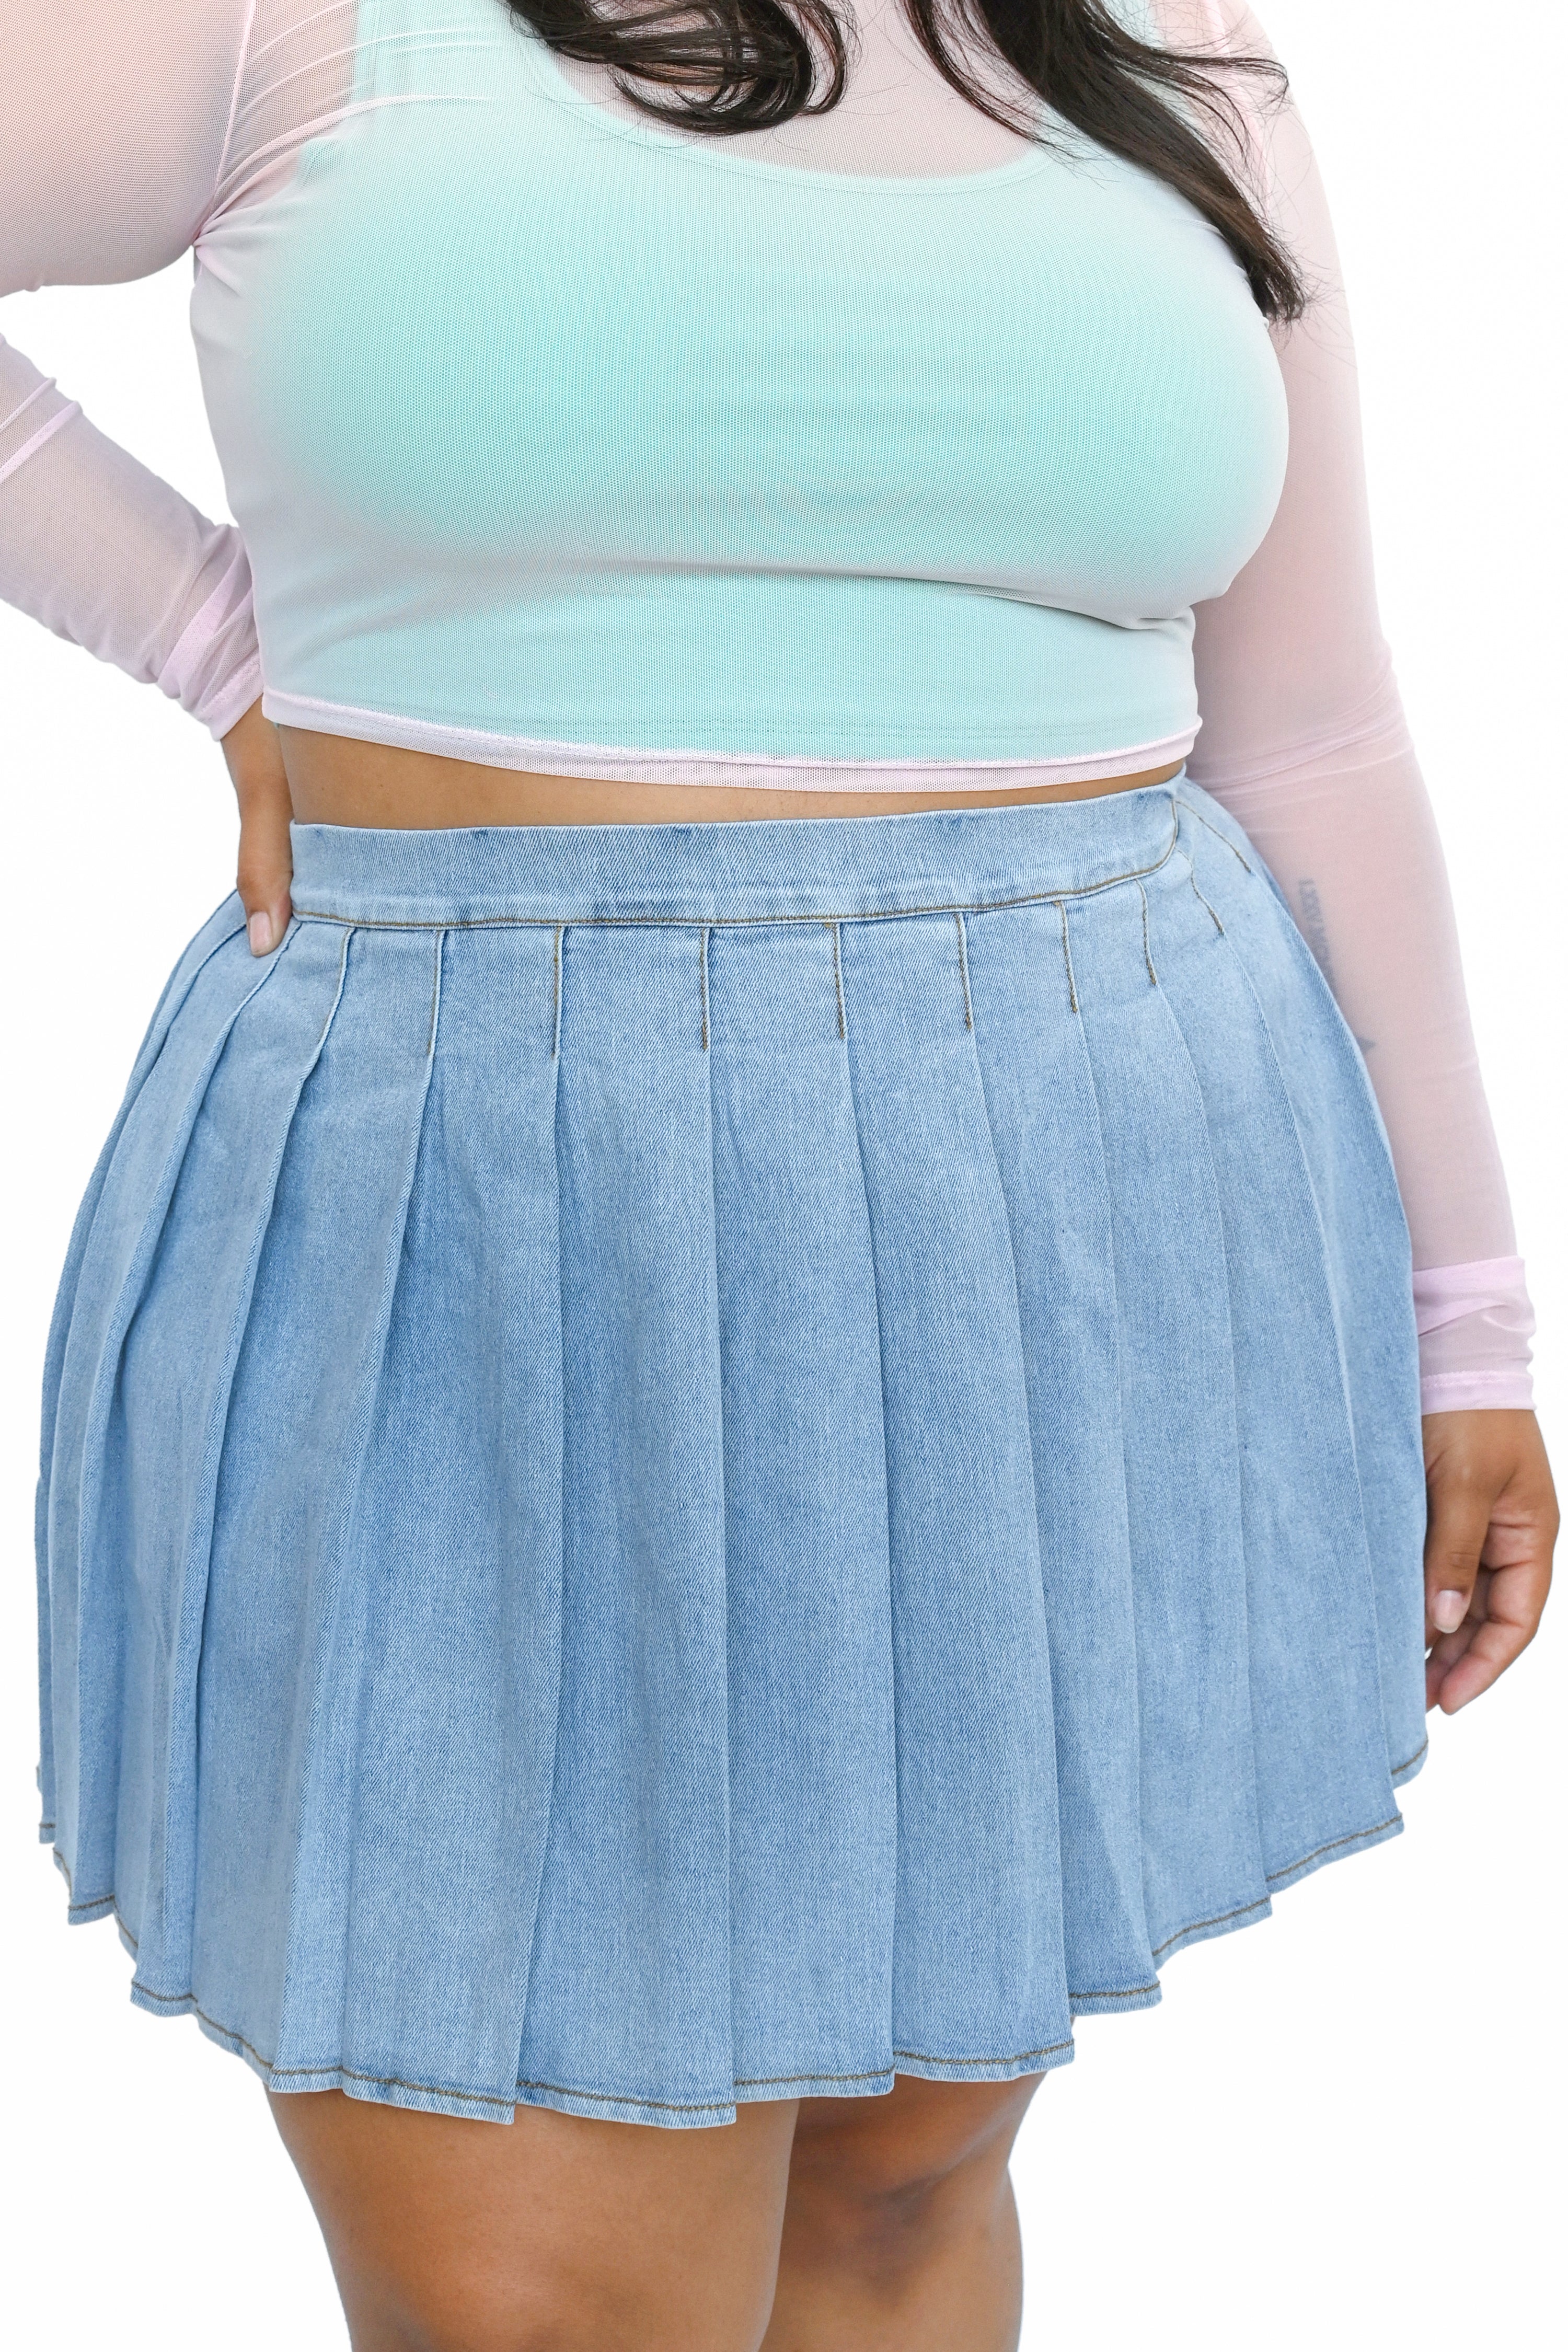 Pleated light wash denim skirt with built in shorts